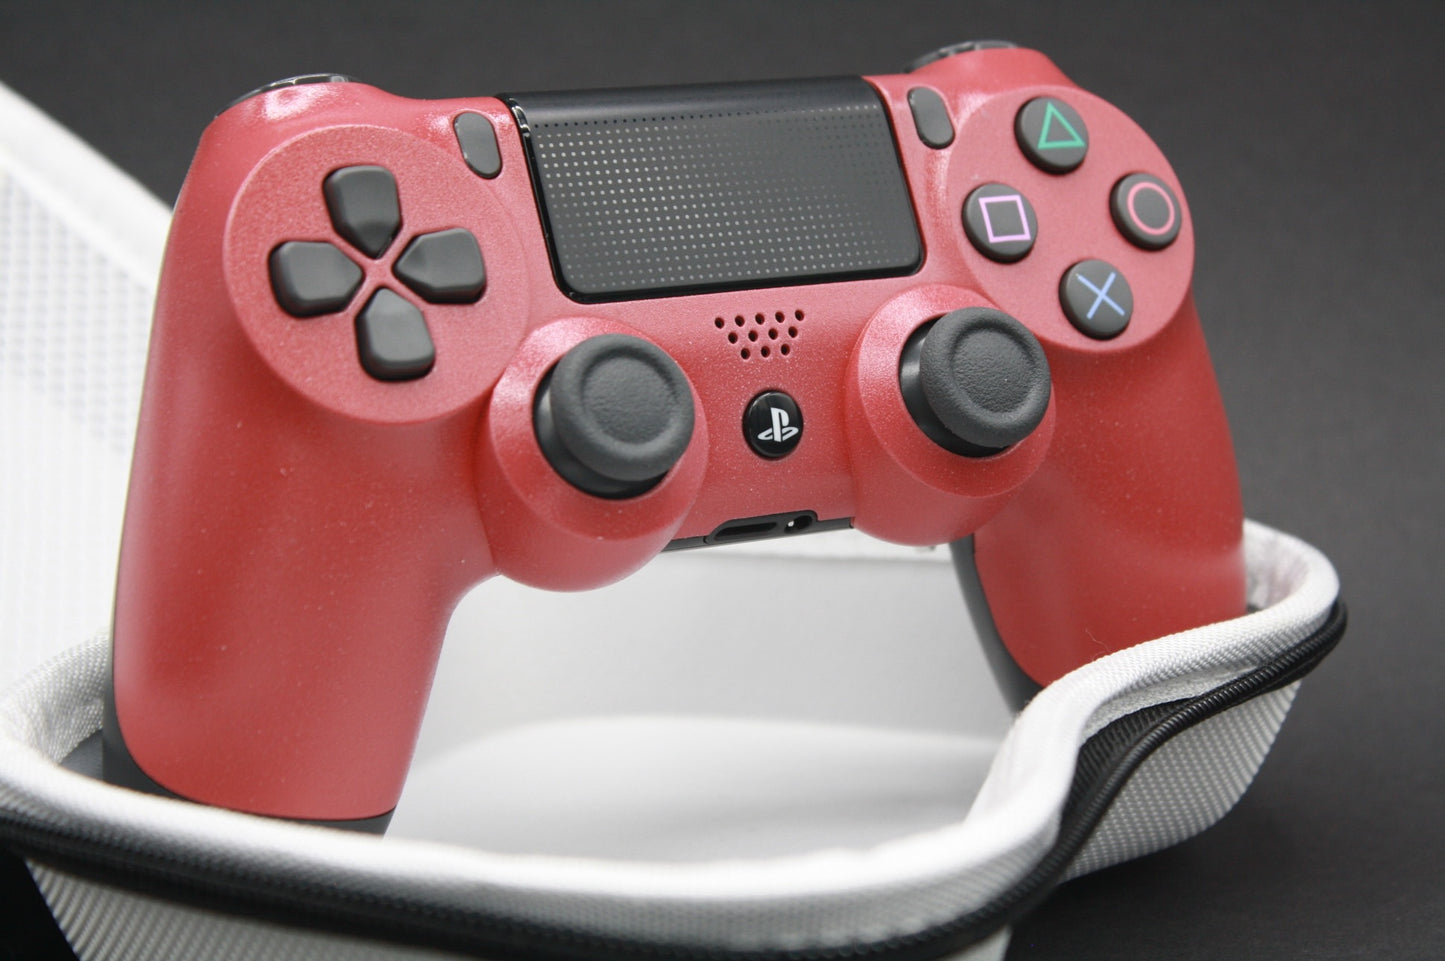 PS4 Controller "Colorswitch" mit Zweier-Paddles